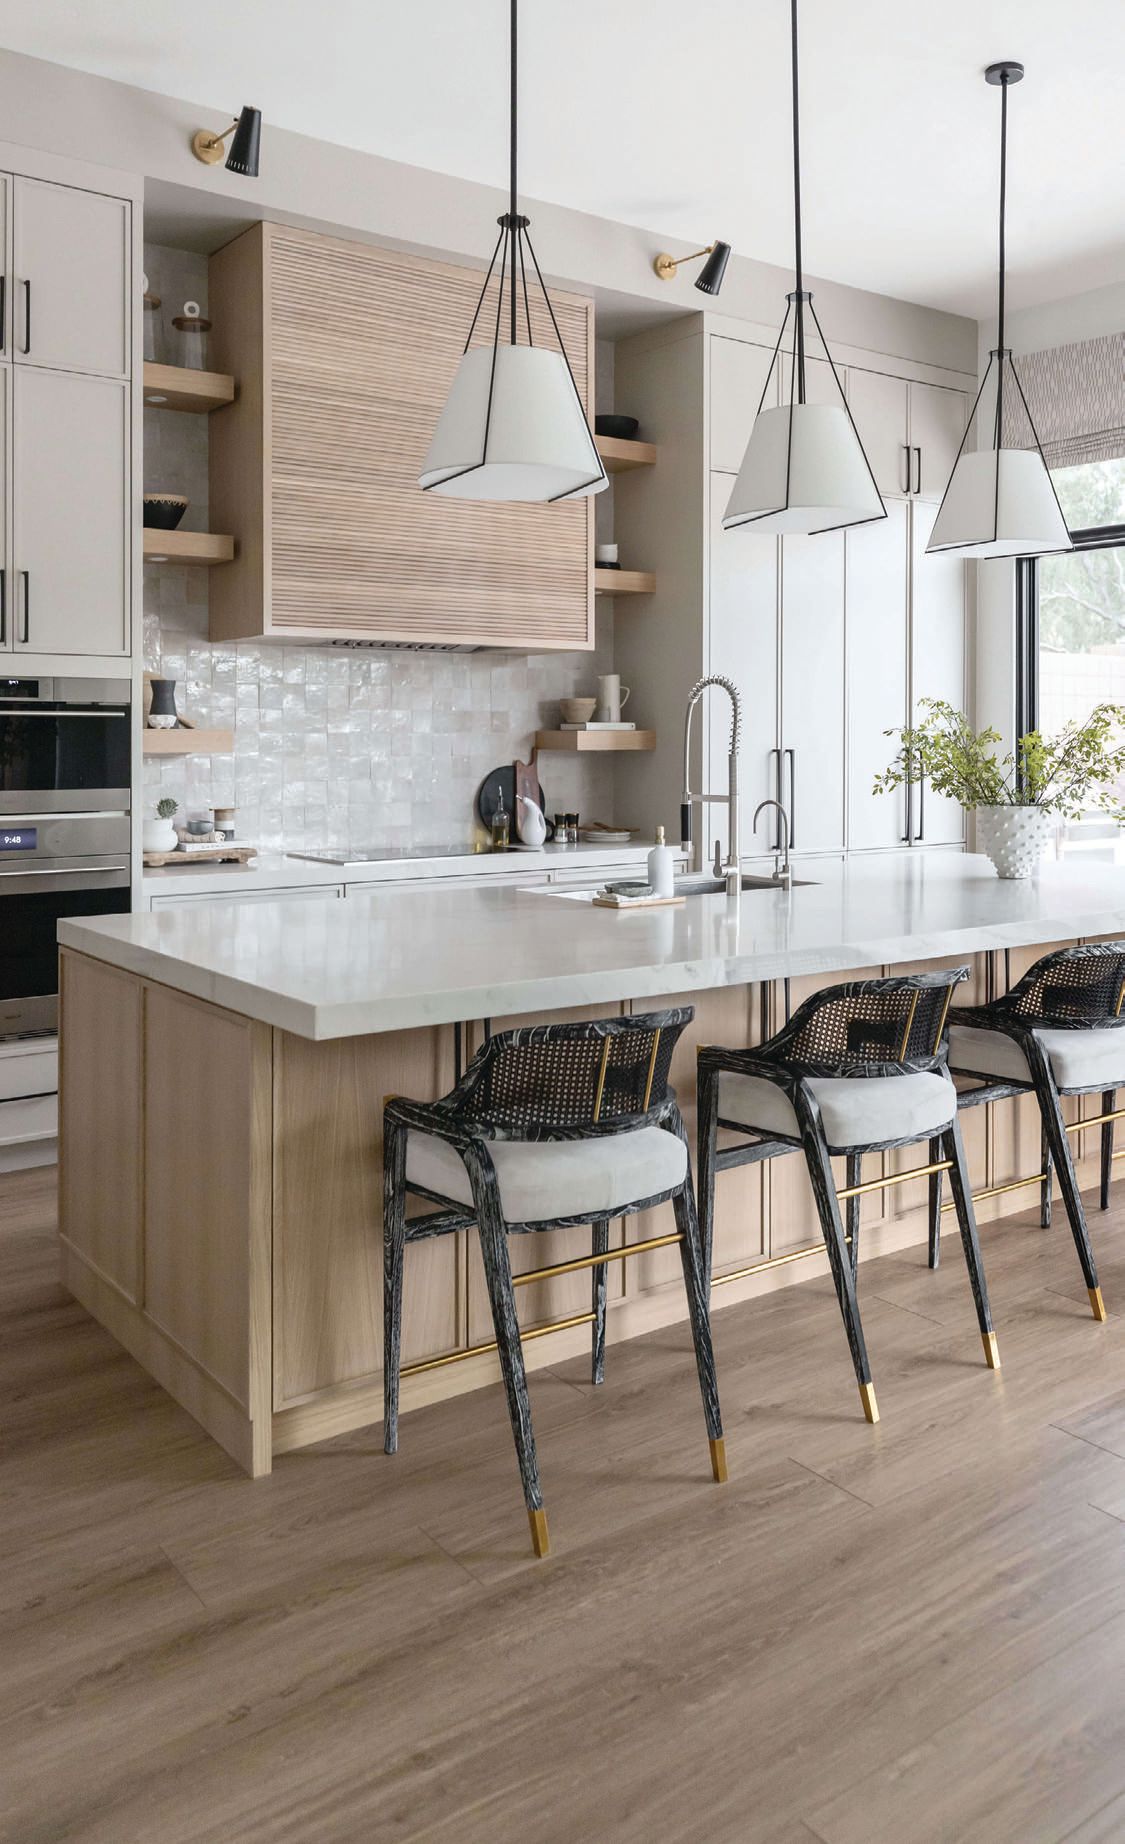 In the kitchen, a white oak island is topped with Heloise pendants from Arteriors and surrounded by stunning counter stools from Villa & House Photographed by Life Created